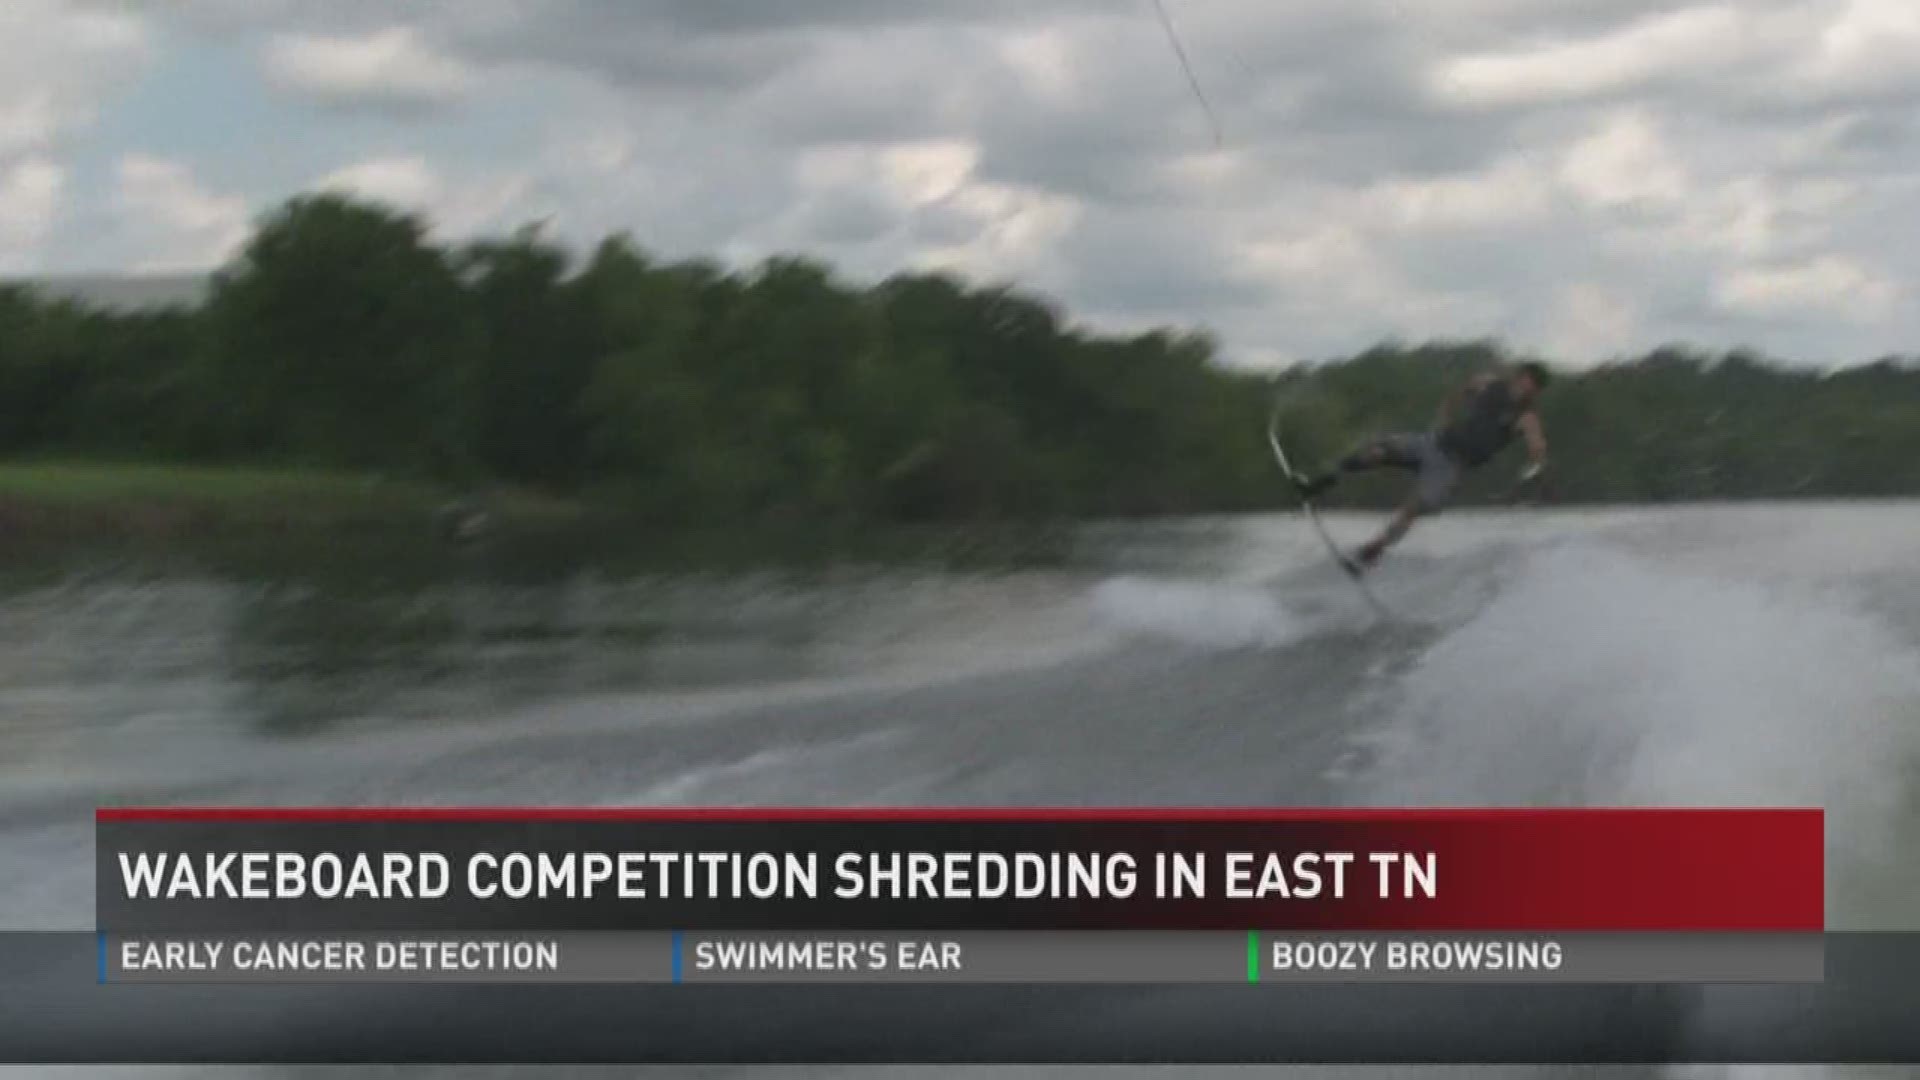 July 7, 2017: Some of the best wakeboarders in the world are getting ready to shred the waters of East Tennessee.